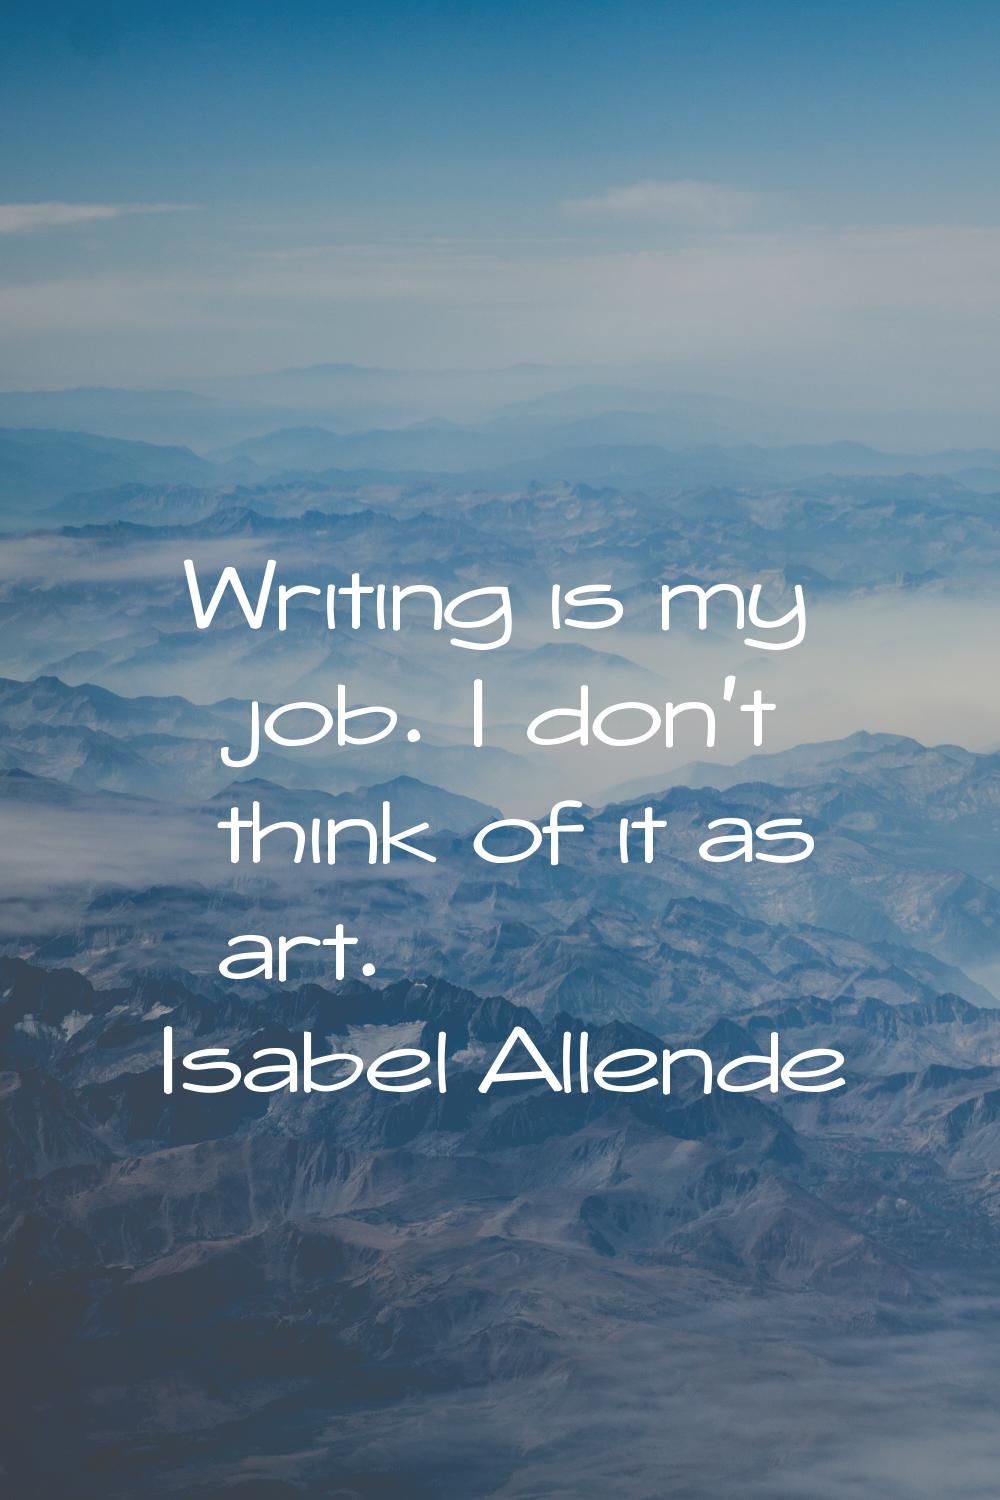 Writing is my job. I don't think of it as art.